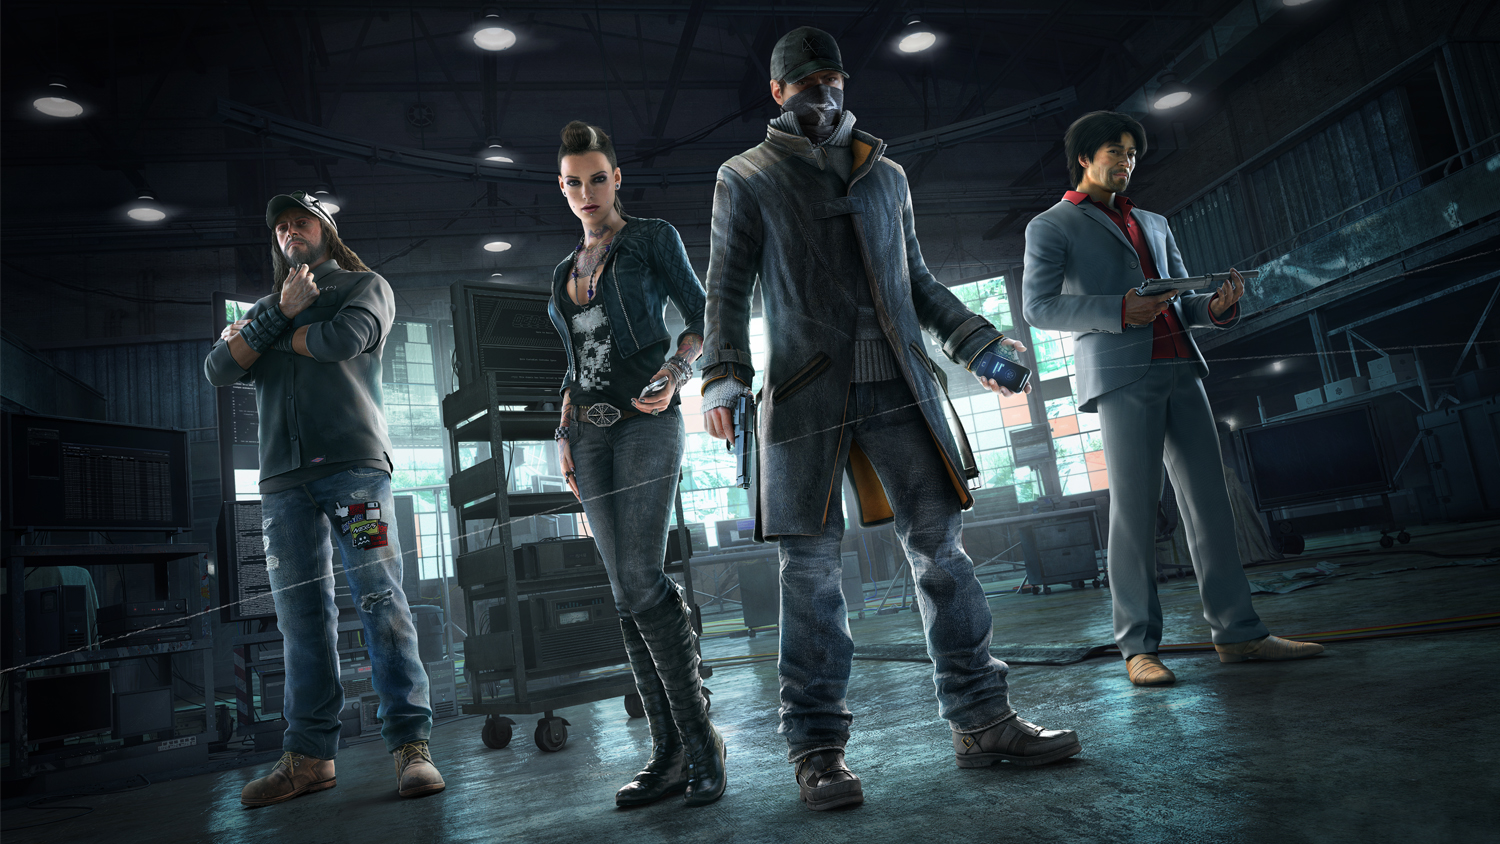 “Watch Dogs” Sequel Confirmed for 2017 Release - Among Other Titles in the Works.